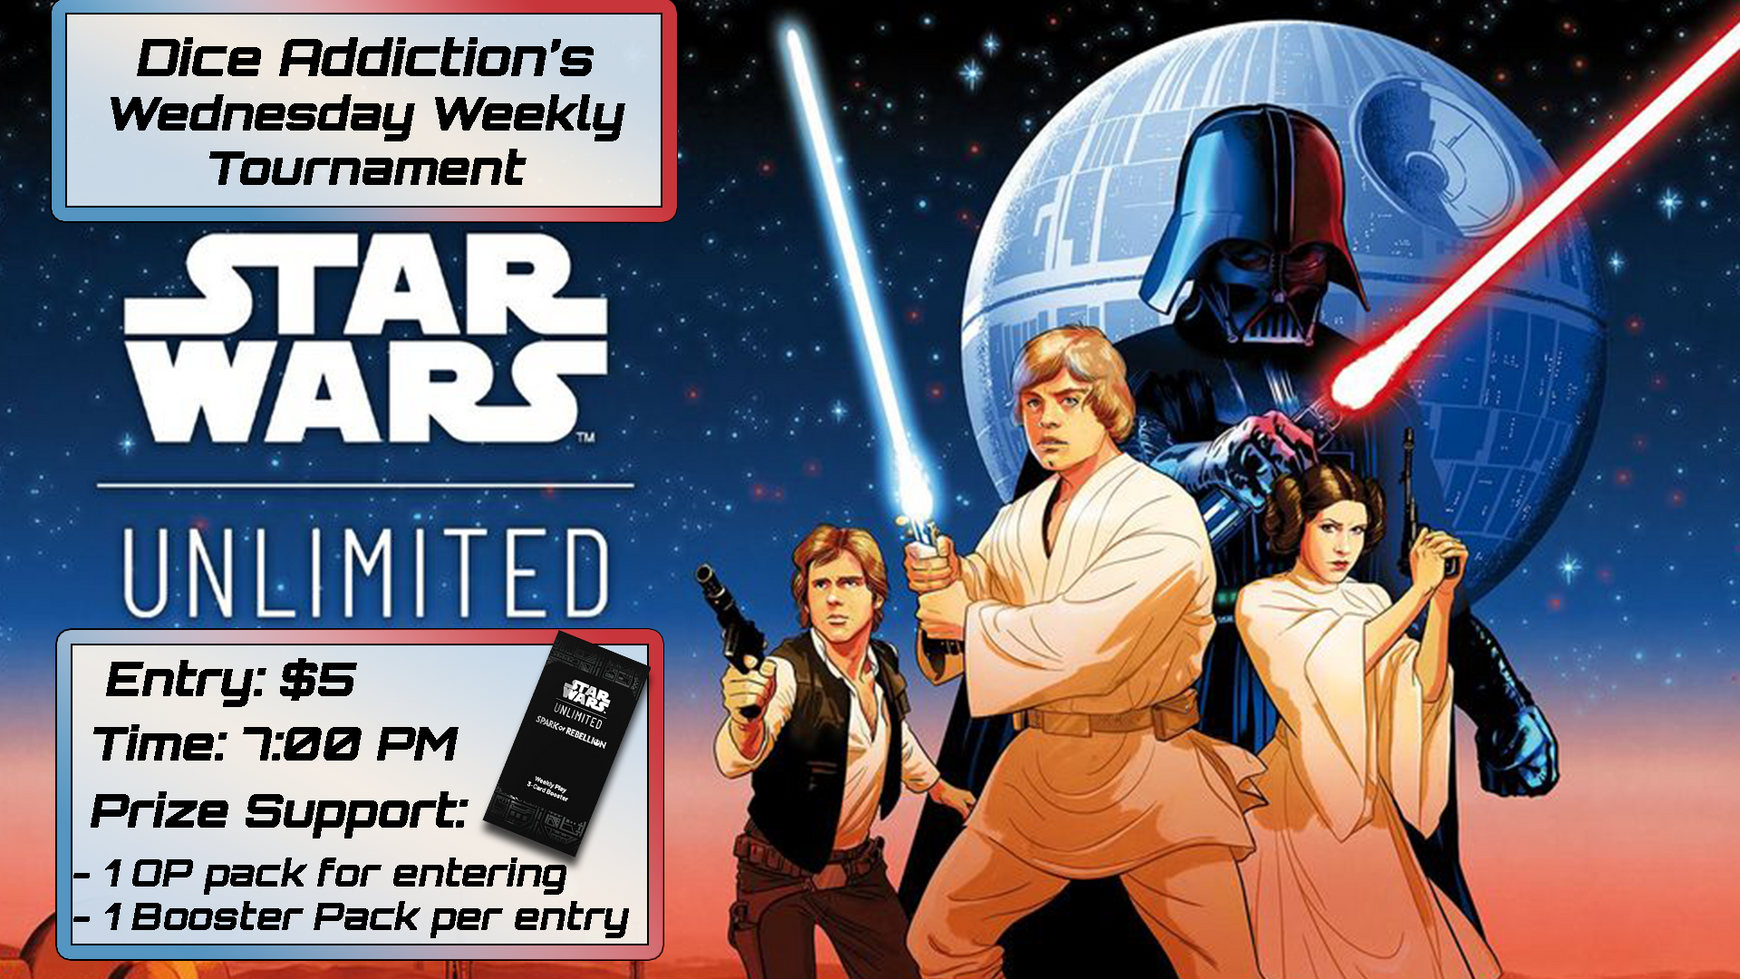 Star Wars: Unlimited Tournament Wednesday Night @ Dice Addiction